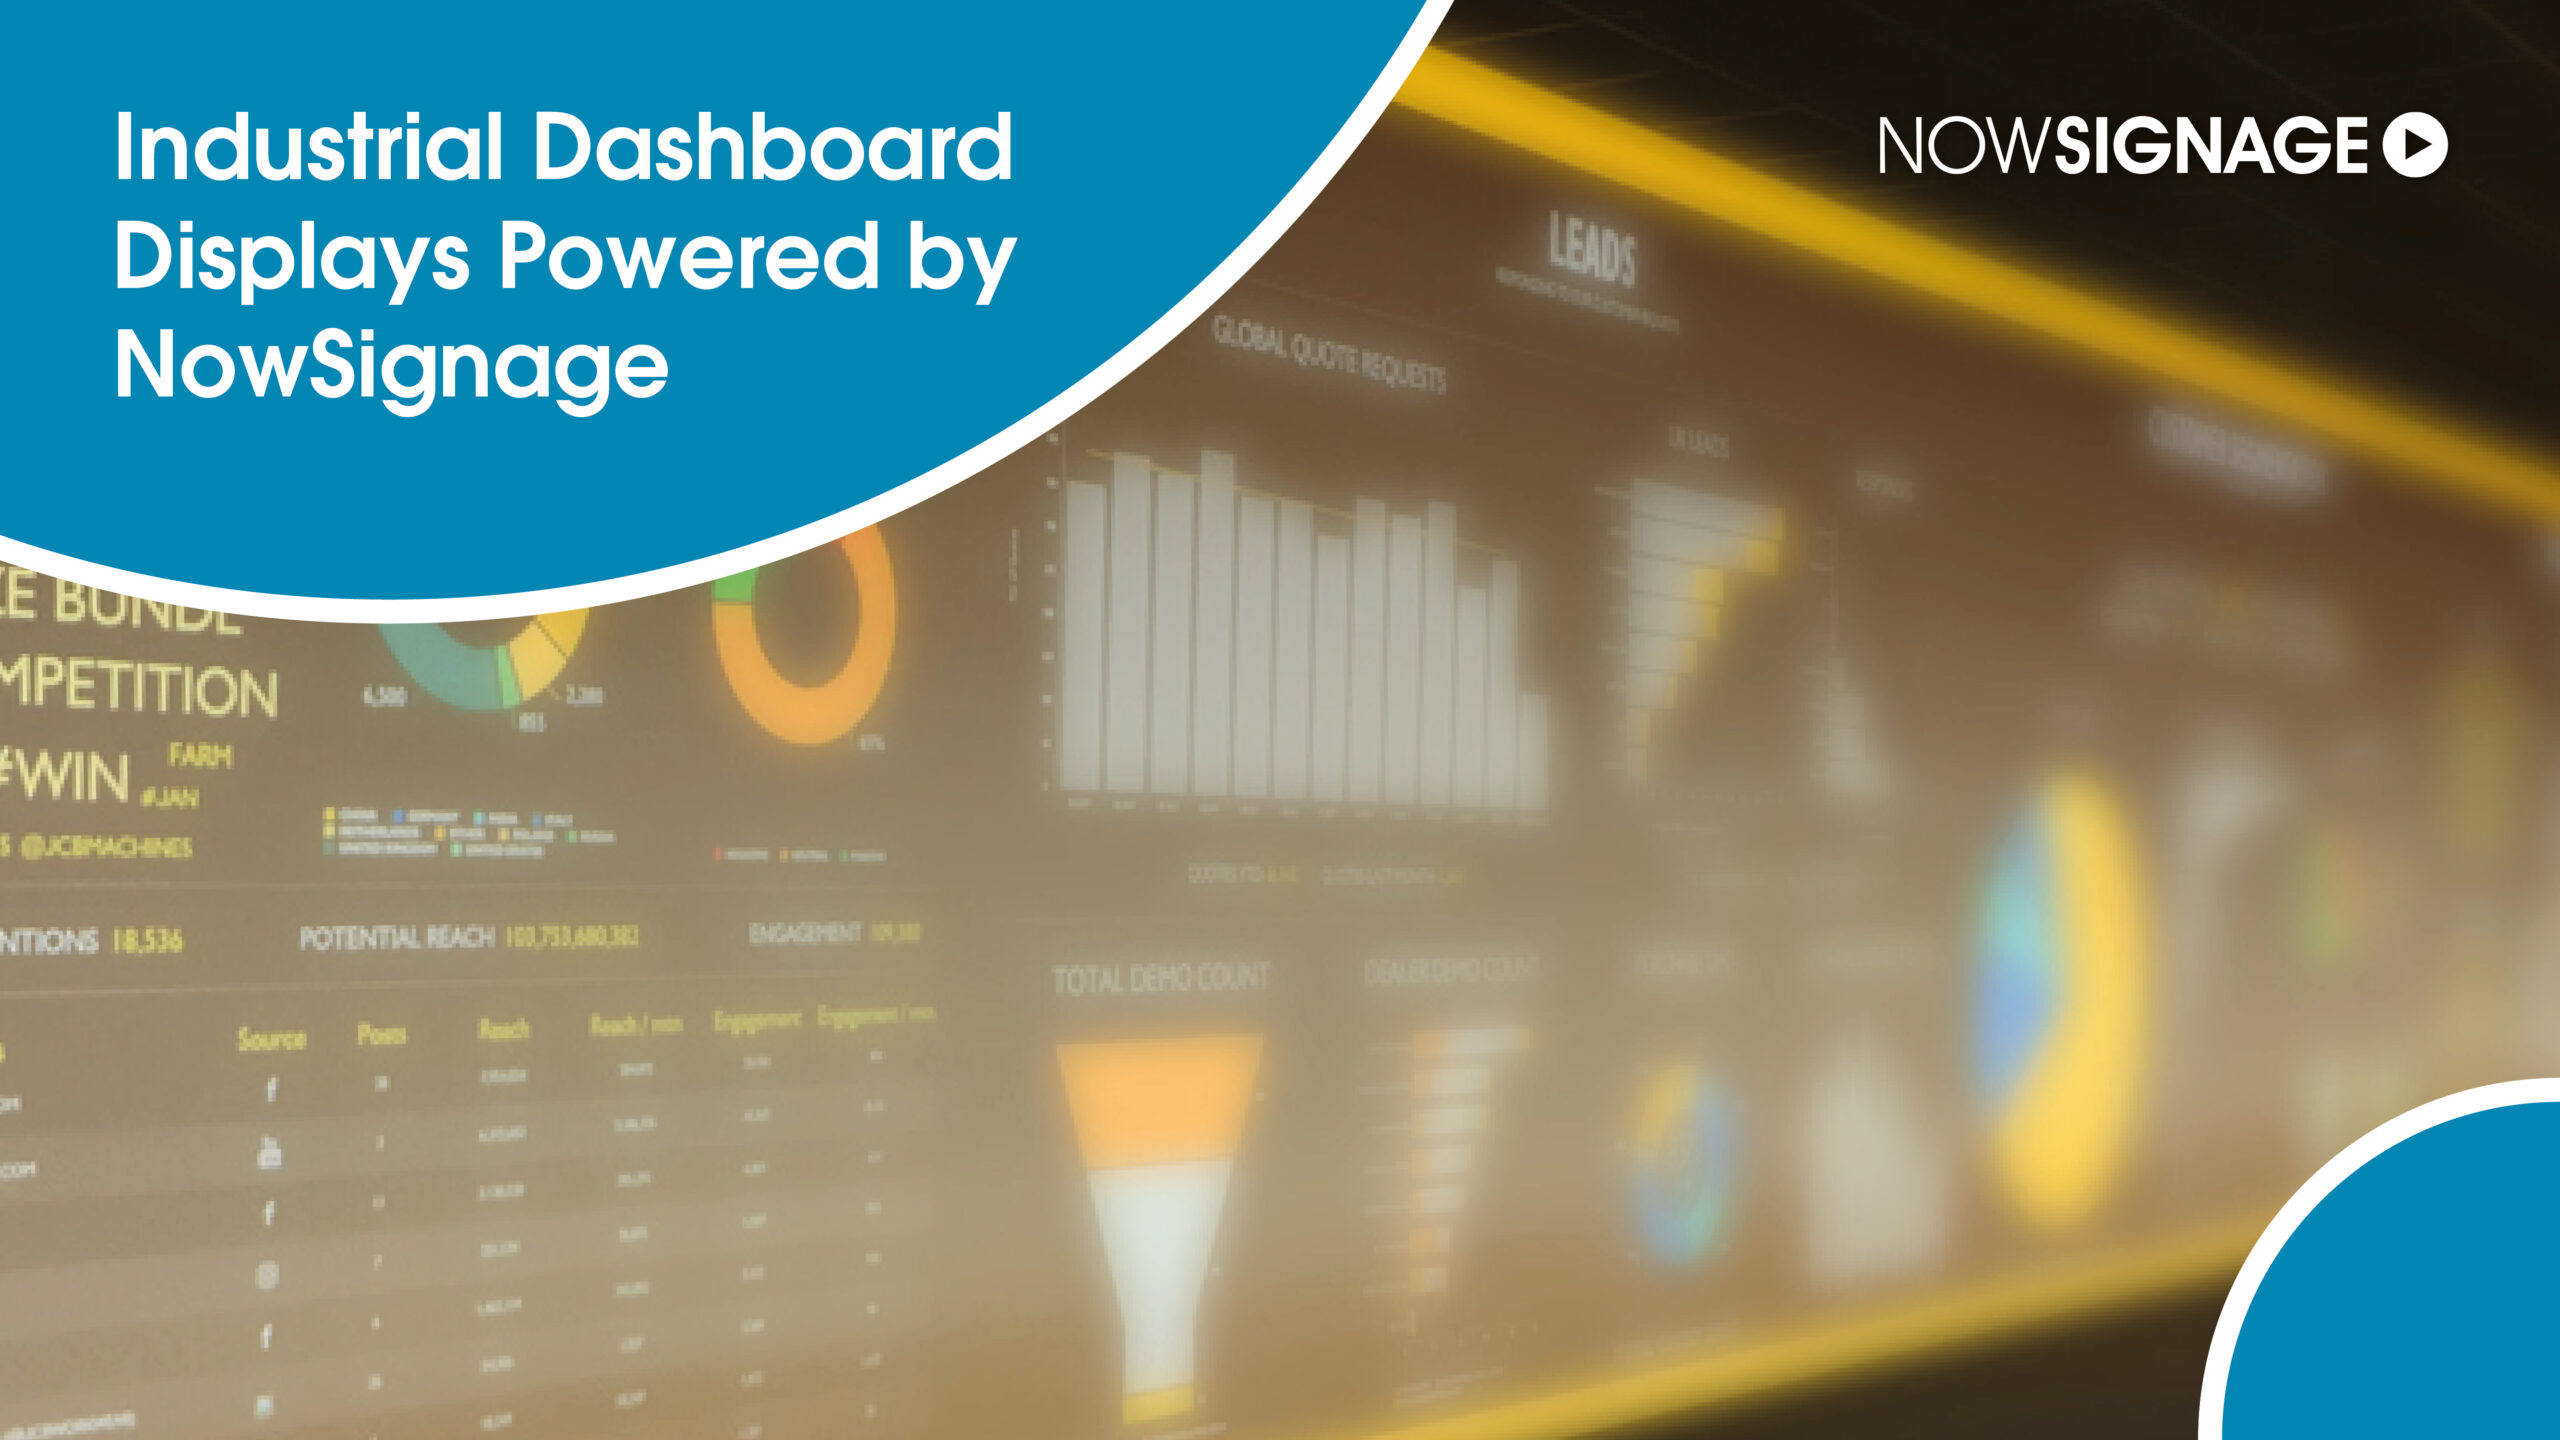 Industrial dashboard displays powered by NowSignage